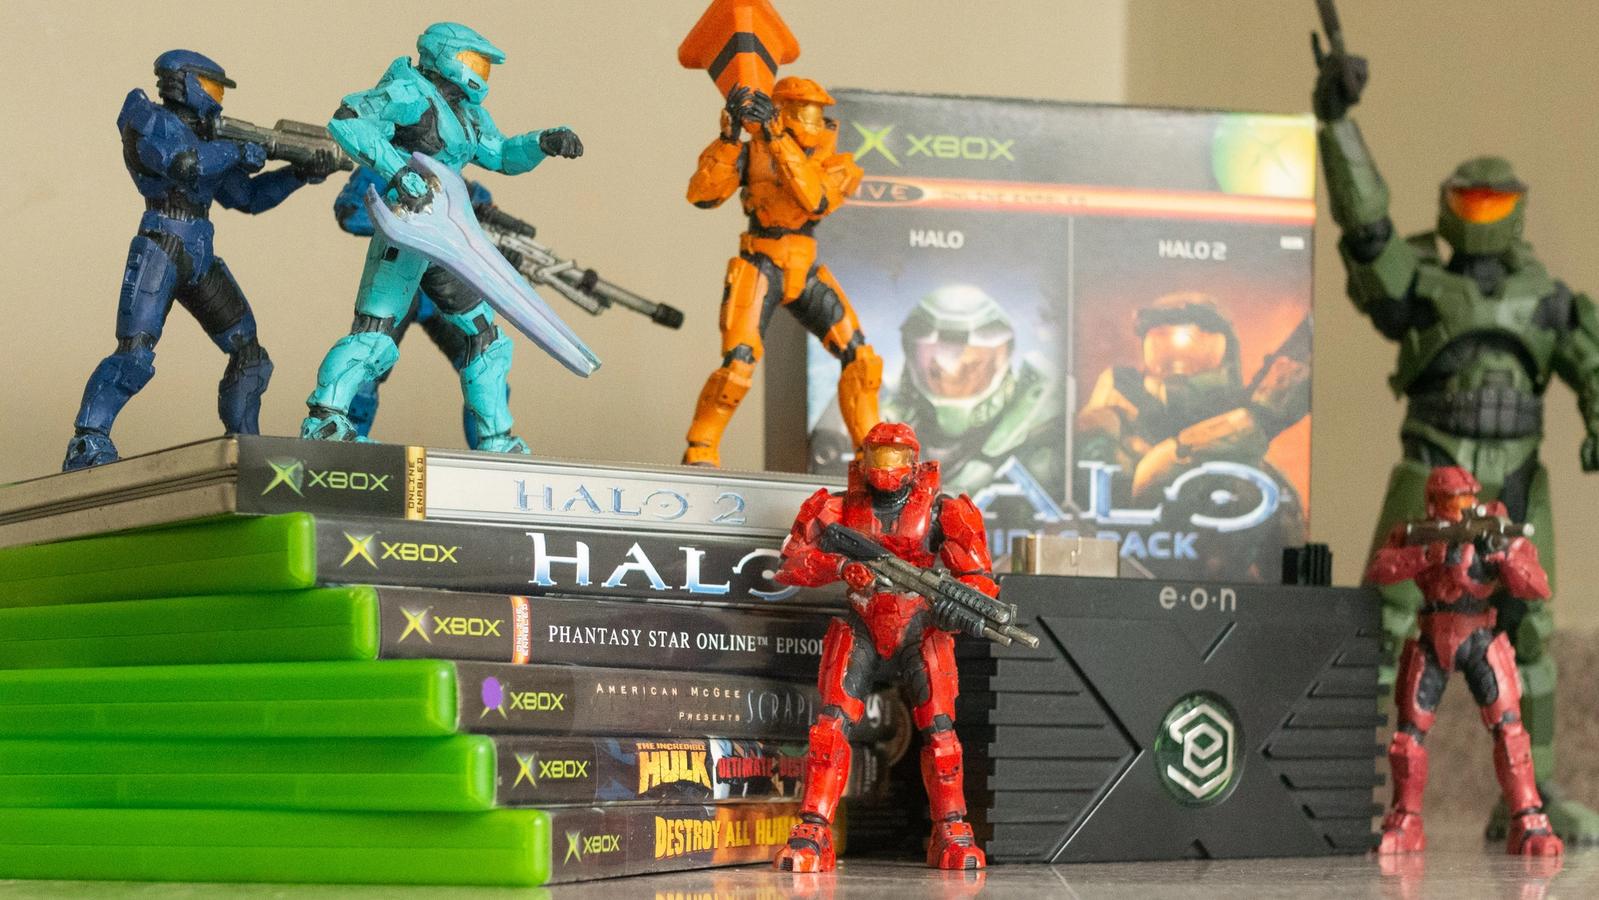 The EON Gaming XBHD adapter between a myriad of OG Xbox games and a collection of Red vs Blue Halo spartan figurines